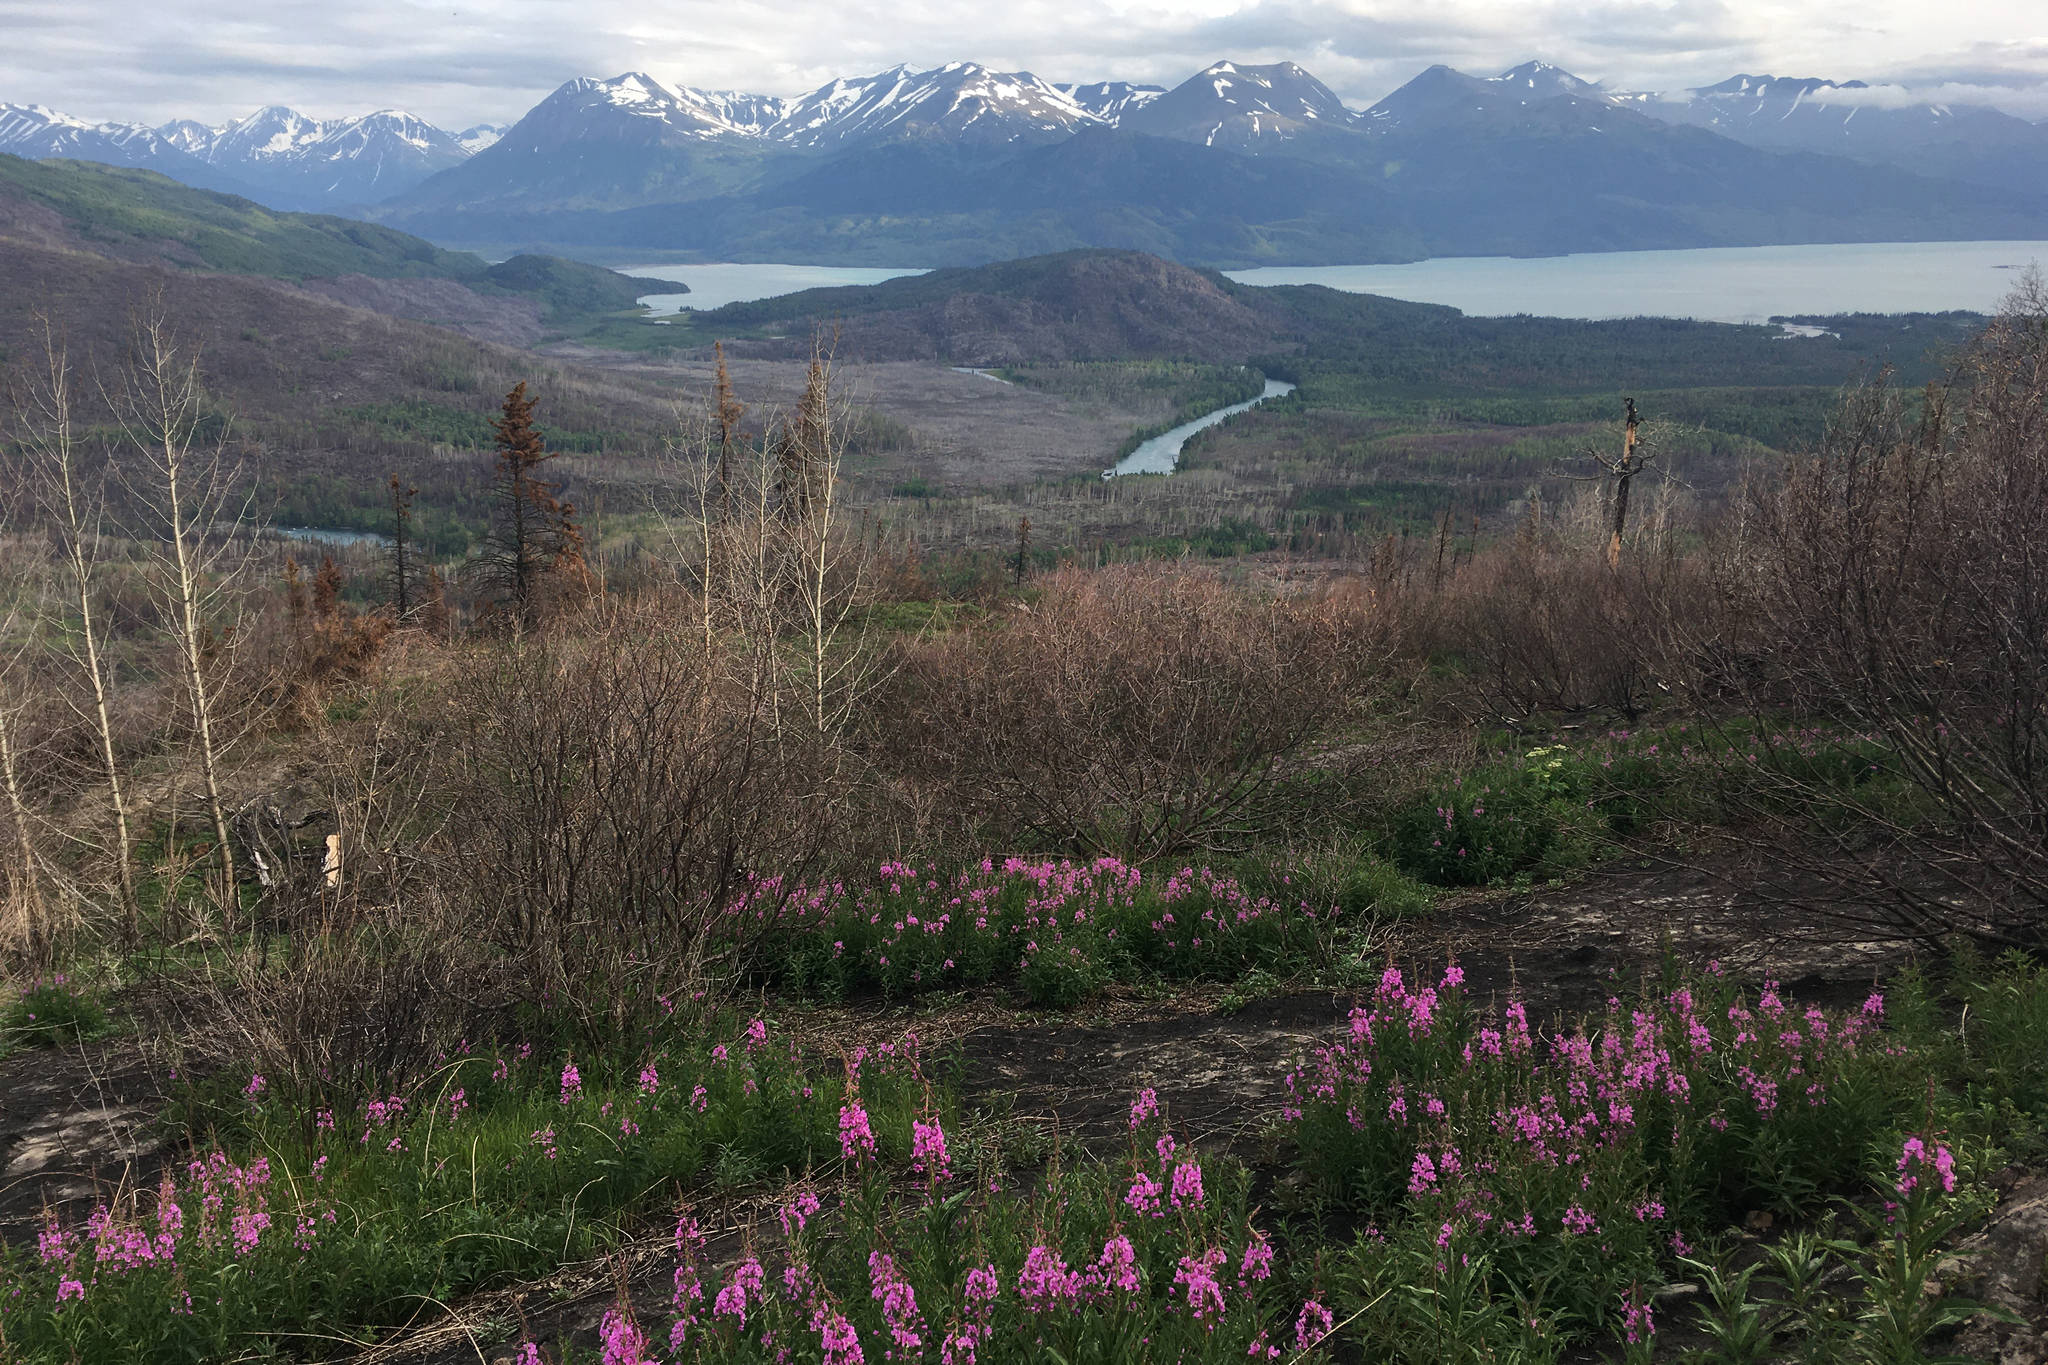 Skilak Lake can be seen from Hideout Trail in the Kenai National Wildlife Refuge on July 5, 2020 in Alaska. (Photograph by Jeff Helminiak/Peninsula Clarion)